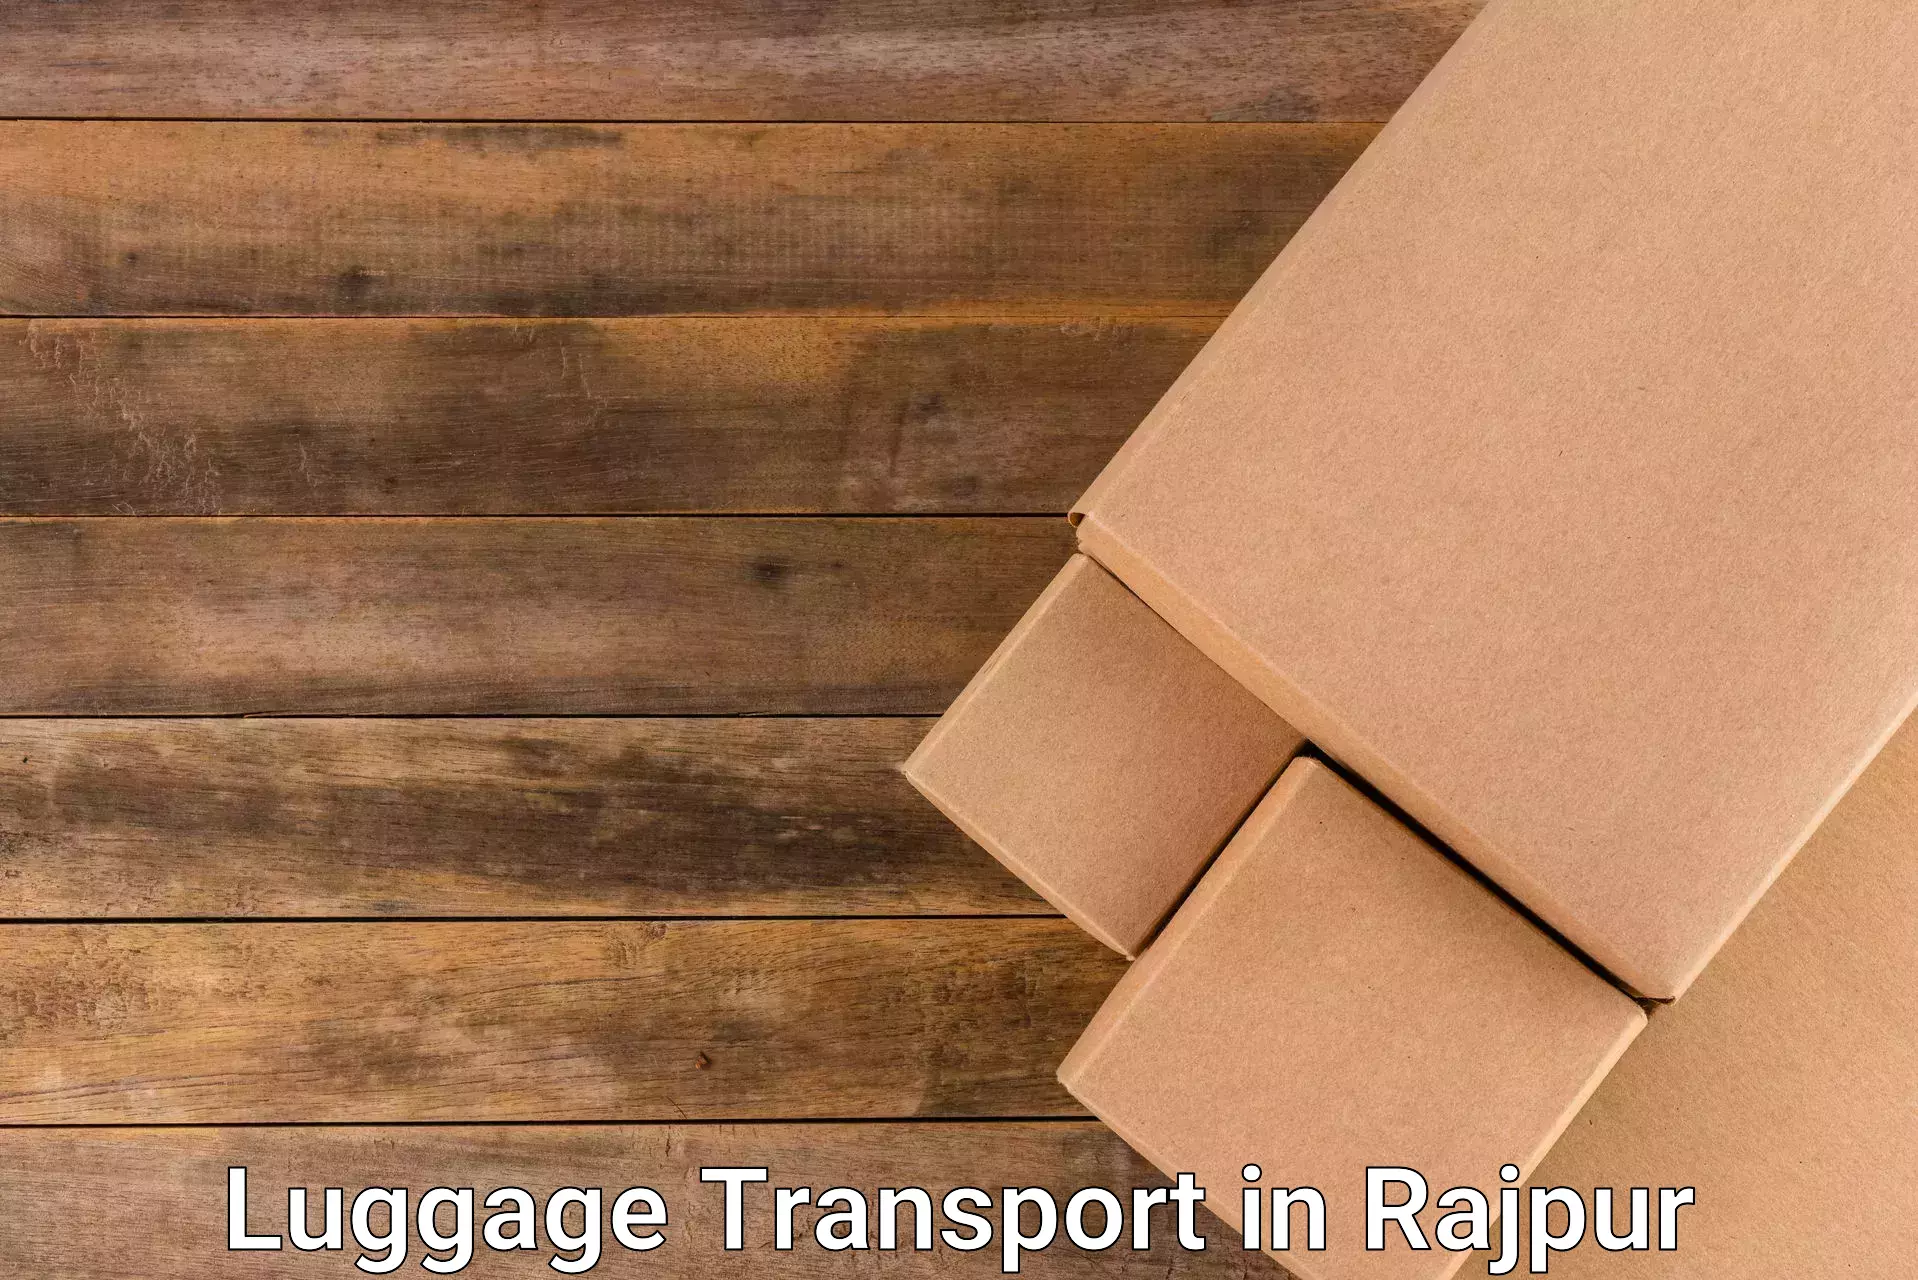 Fast track baggage delivery in Rajpur